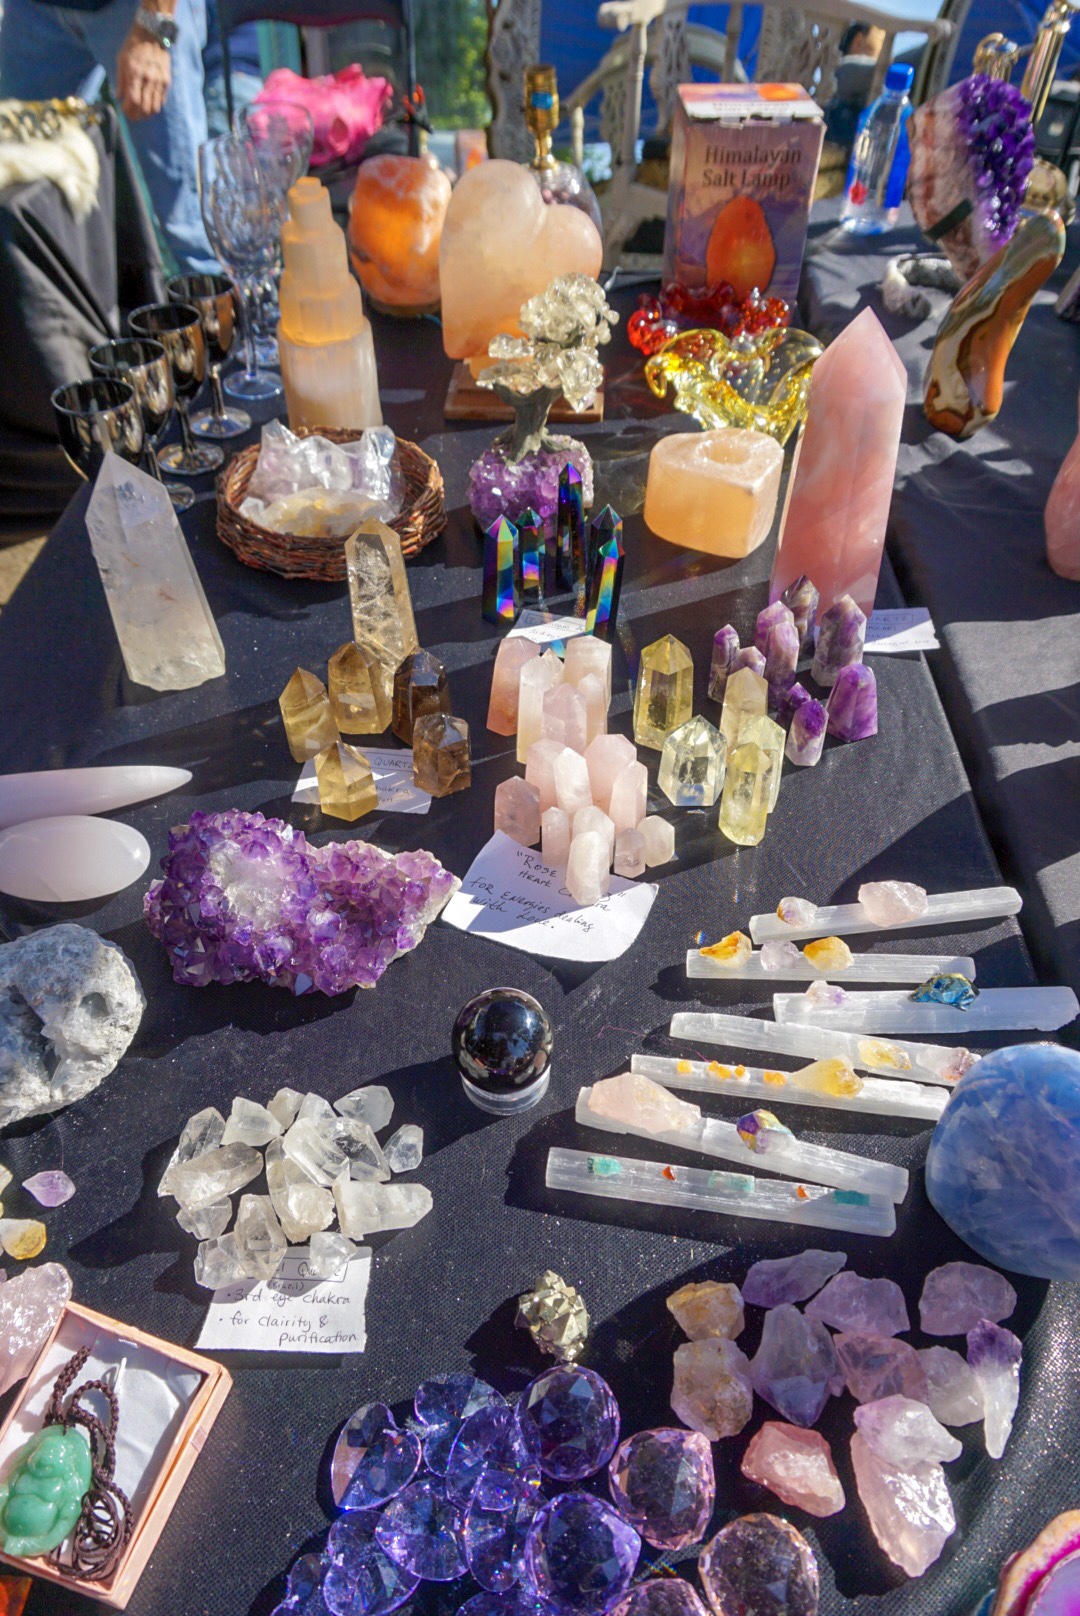 A Trip to the Melrose Trading Post